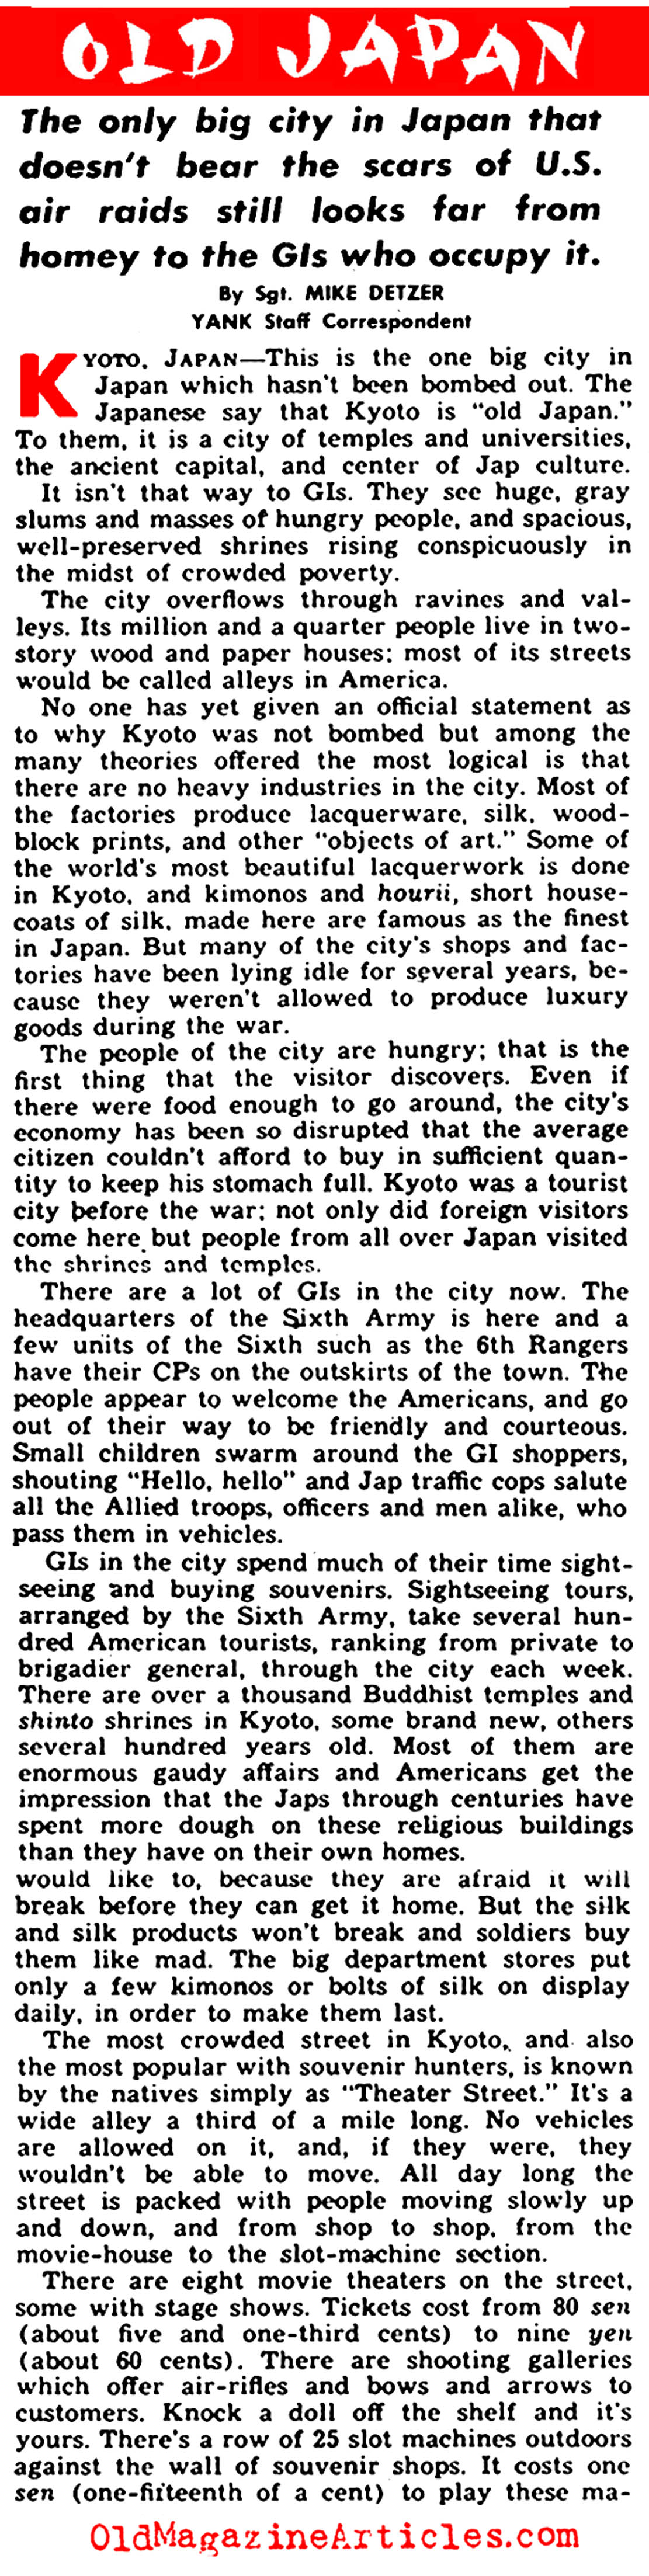 Kyoto: The Japanese City That Was Never Bombed (Yank, 1945)